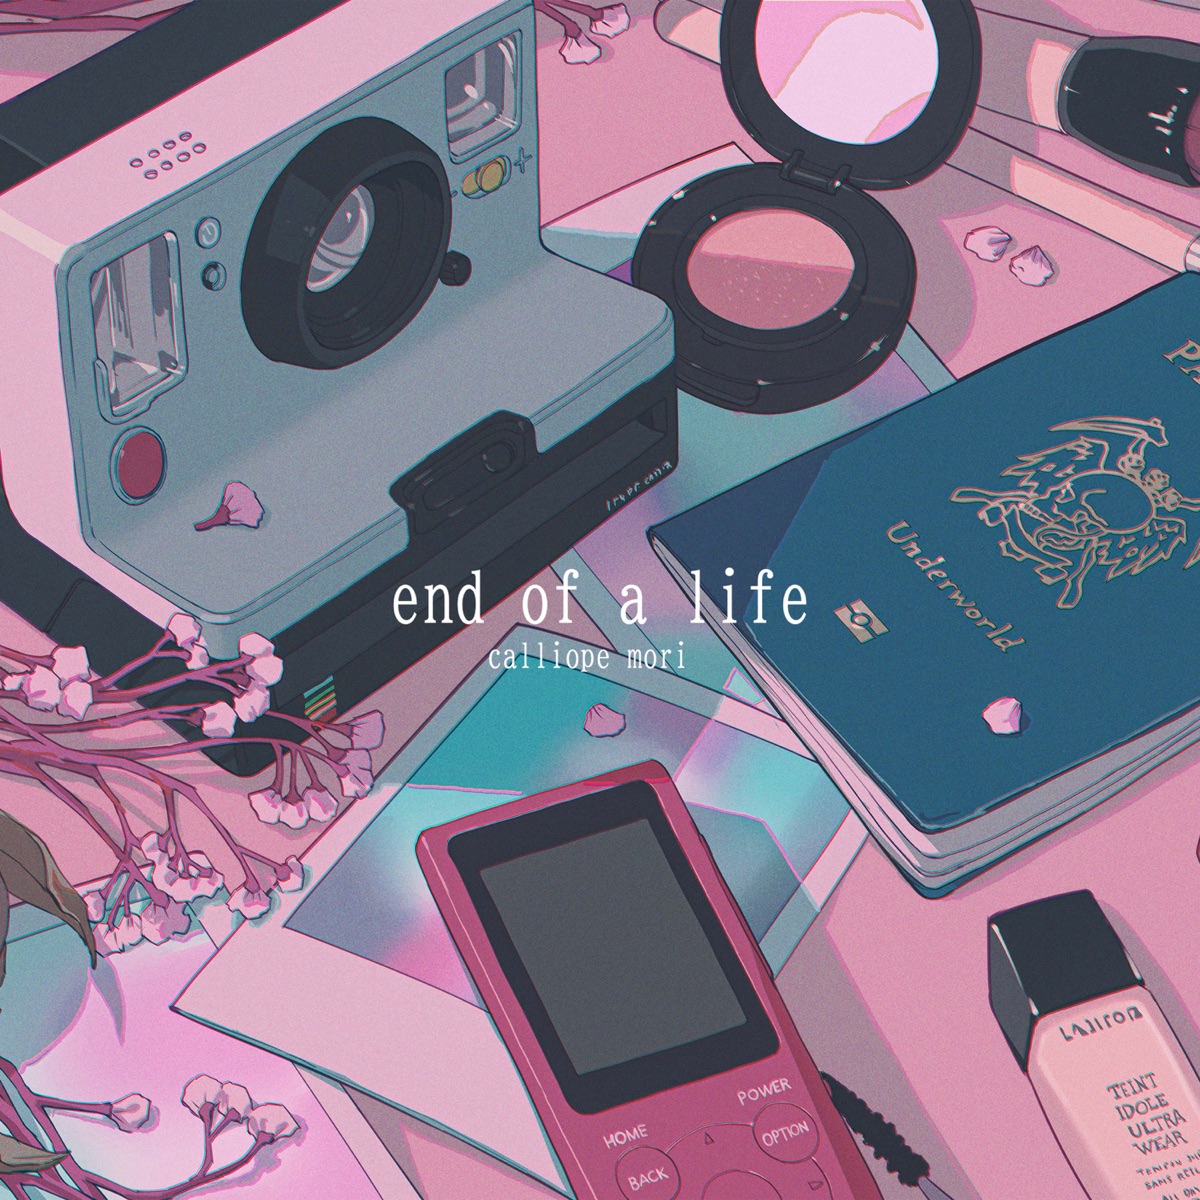 Cover for『Mori Calliope - end of a life』from the release『end of a life』